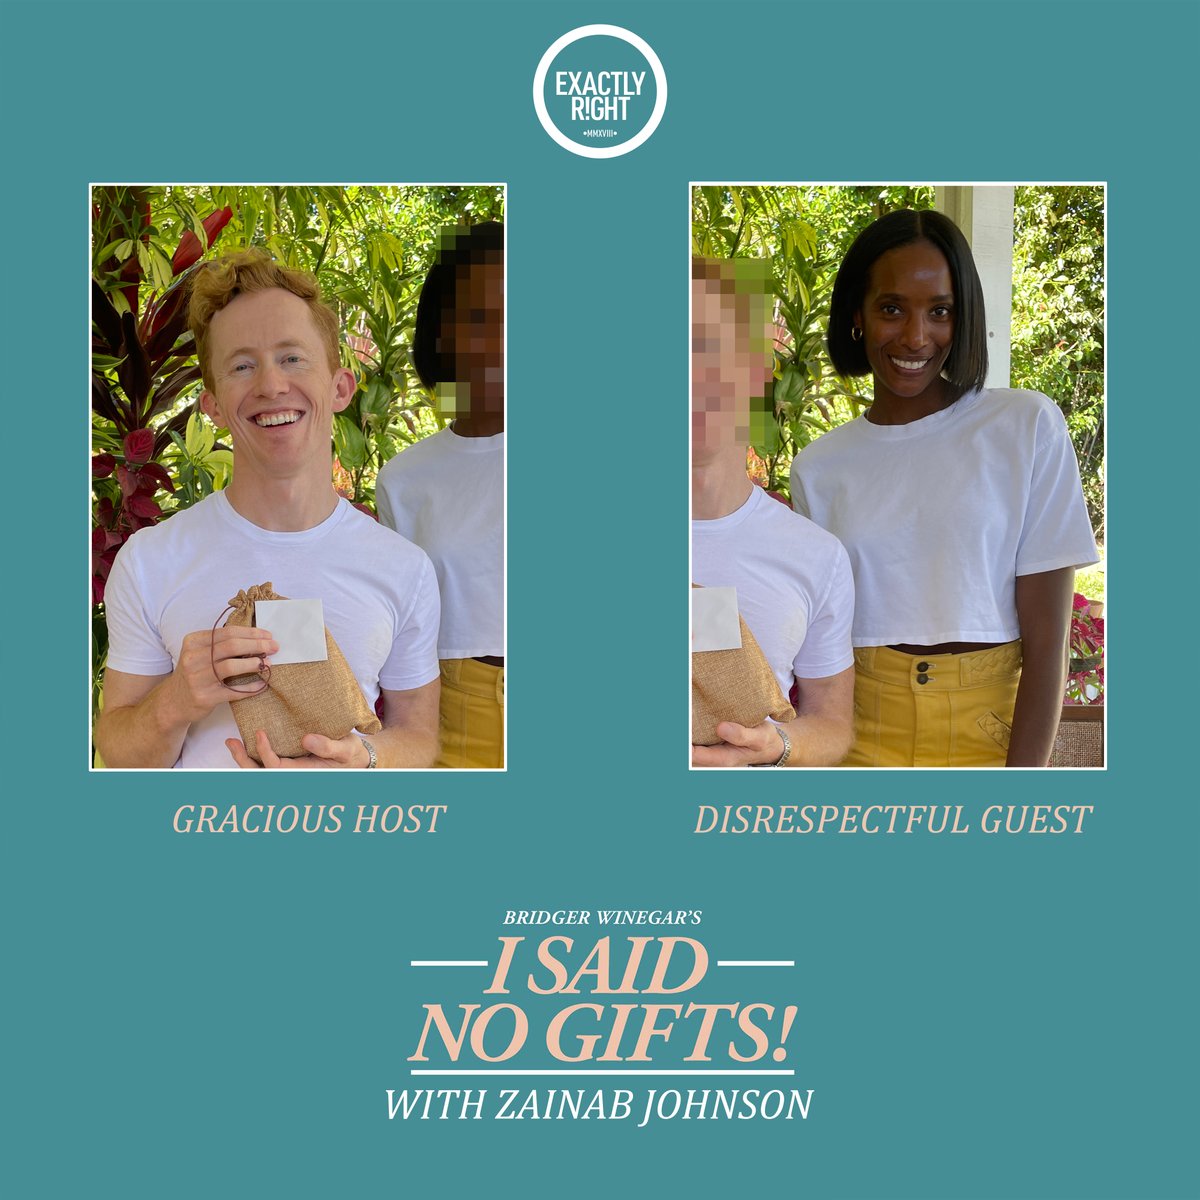 Hello, here is a new episode of I Said No Gifts! with the outstanding @zainabjohnson, please enjoy

podcasts.apple.com/us/podcast/i-s…